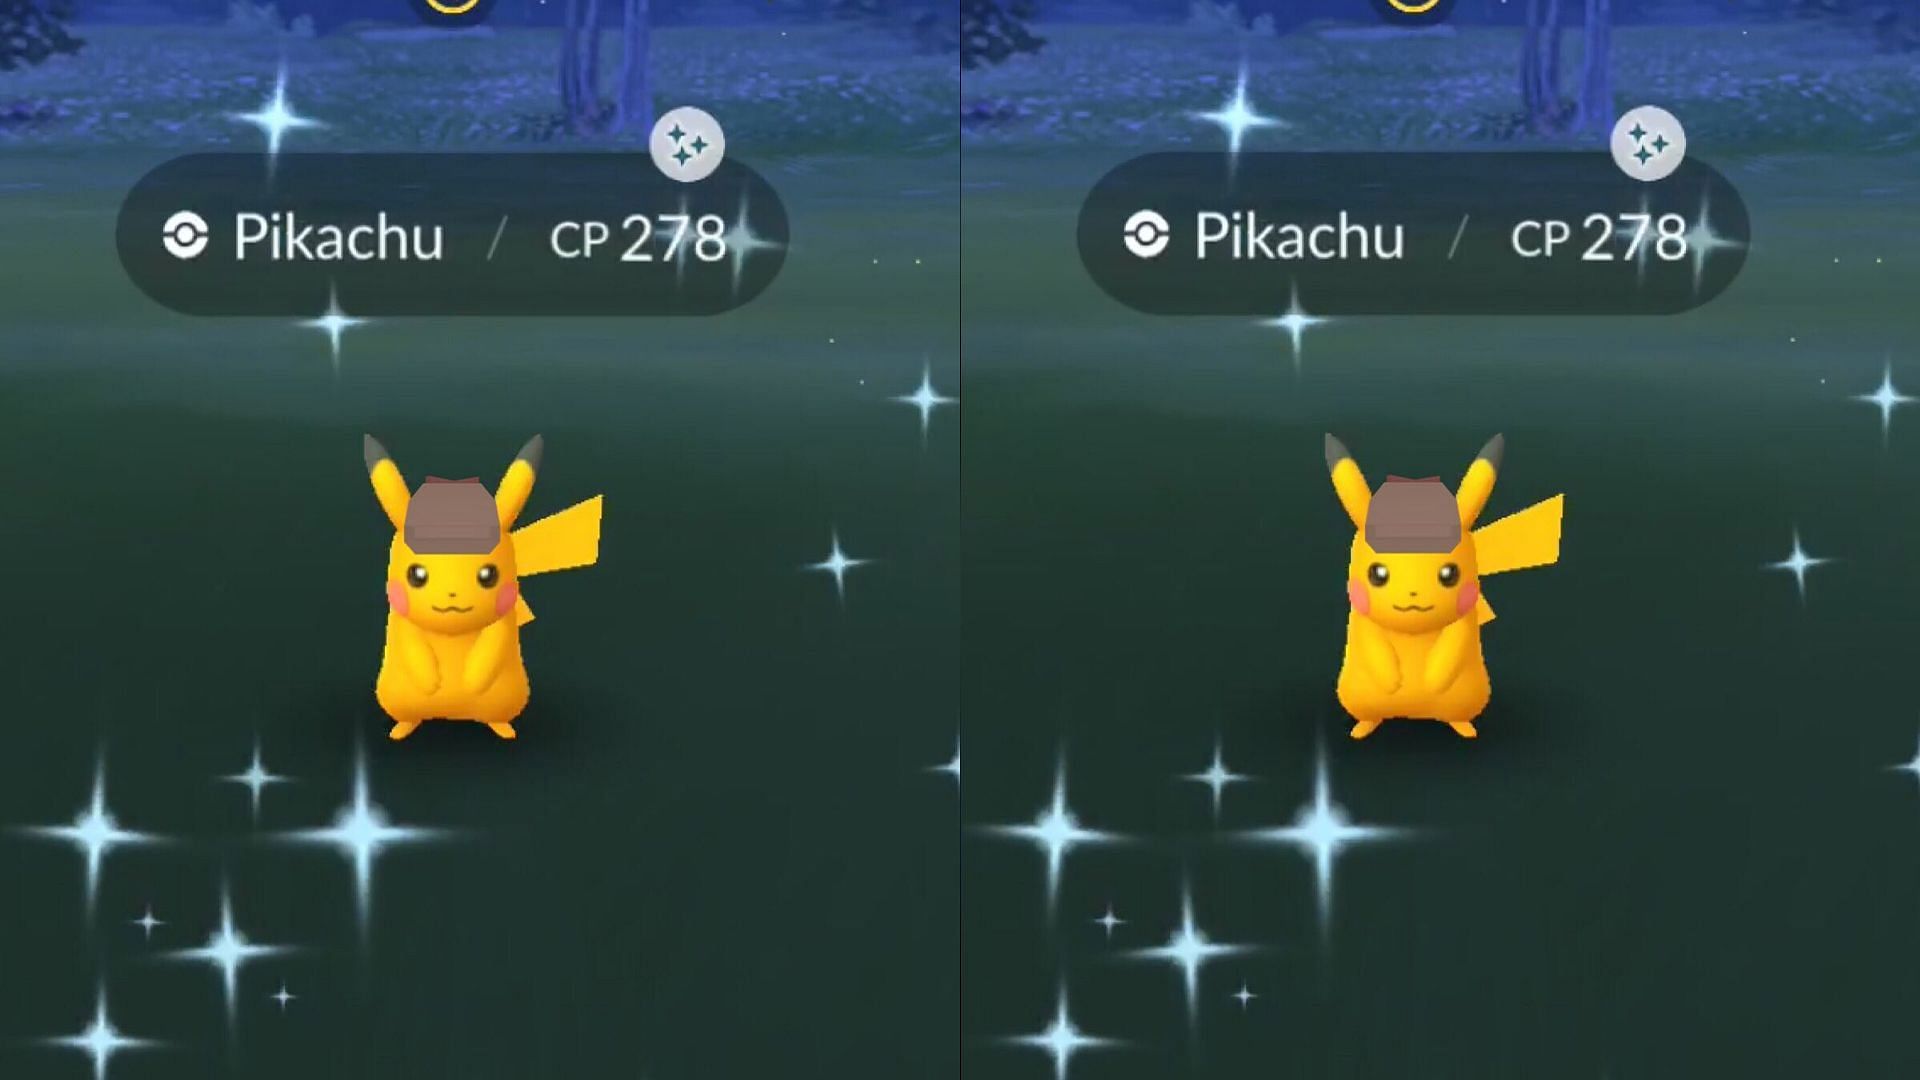 Can Pikachu be shiny in Pokemon GO?